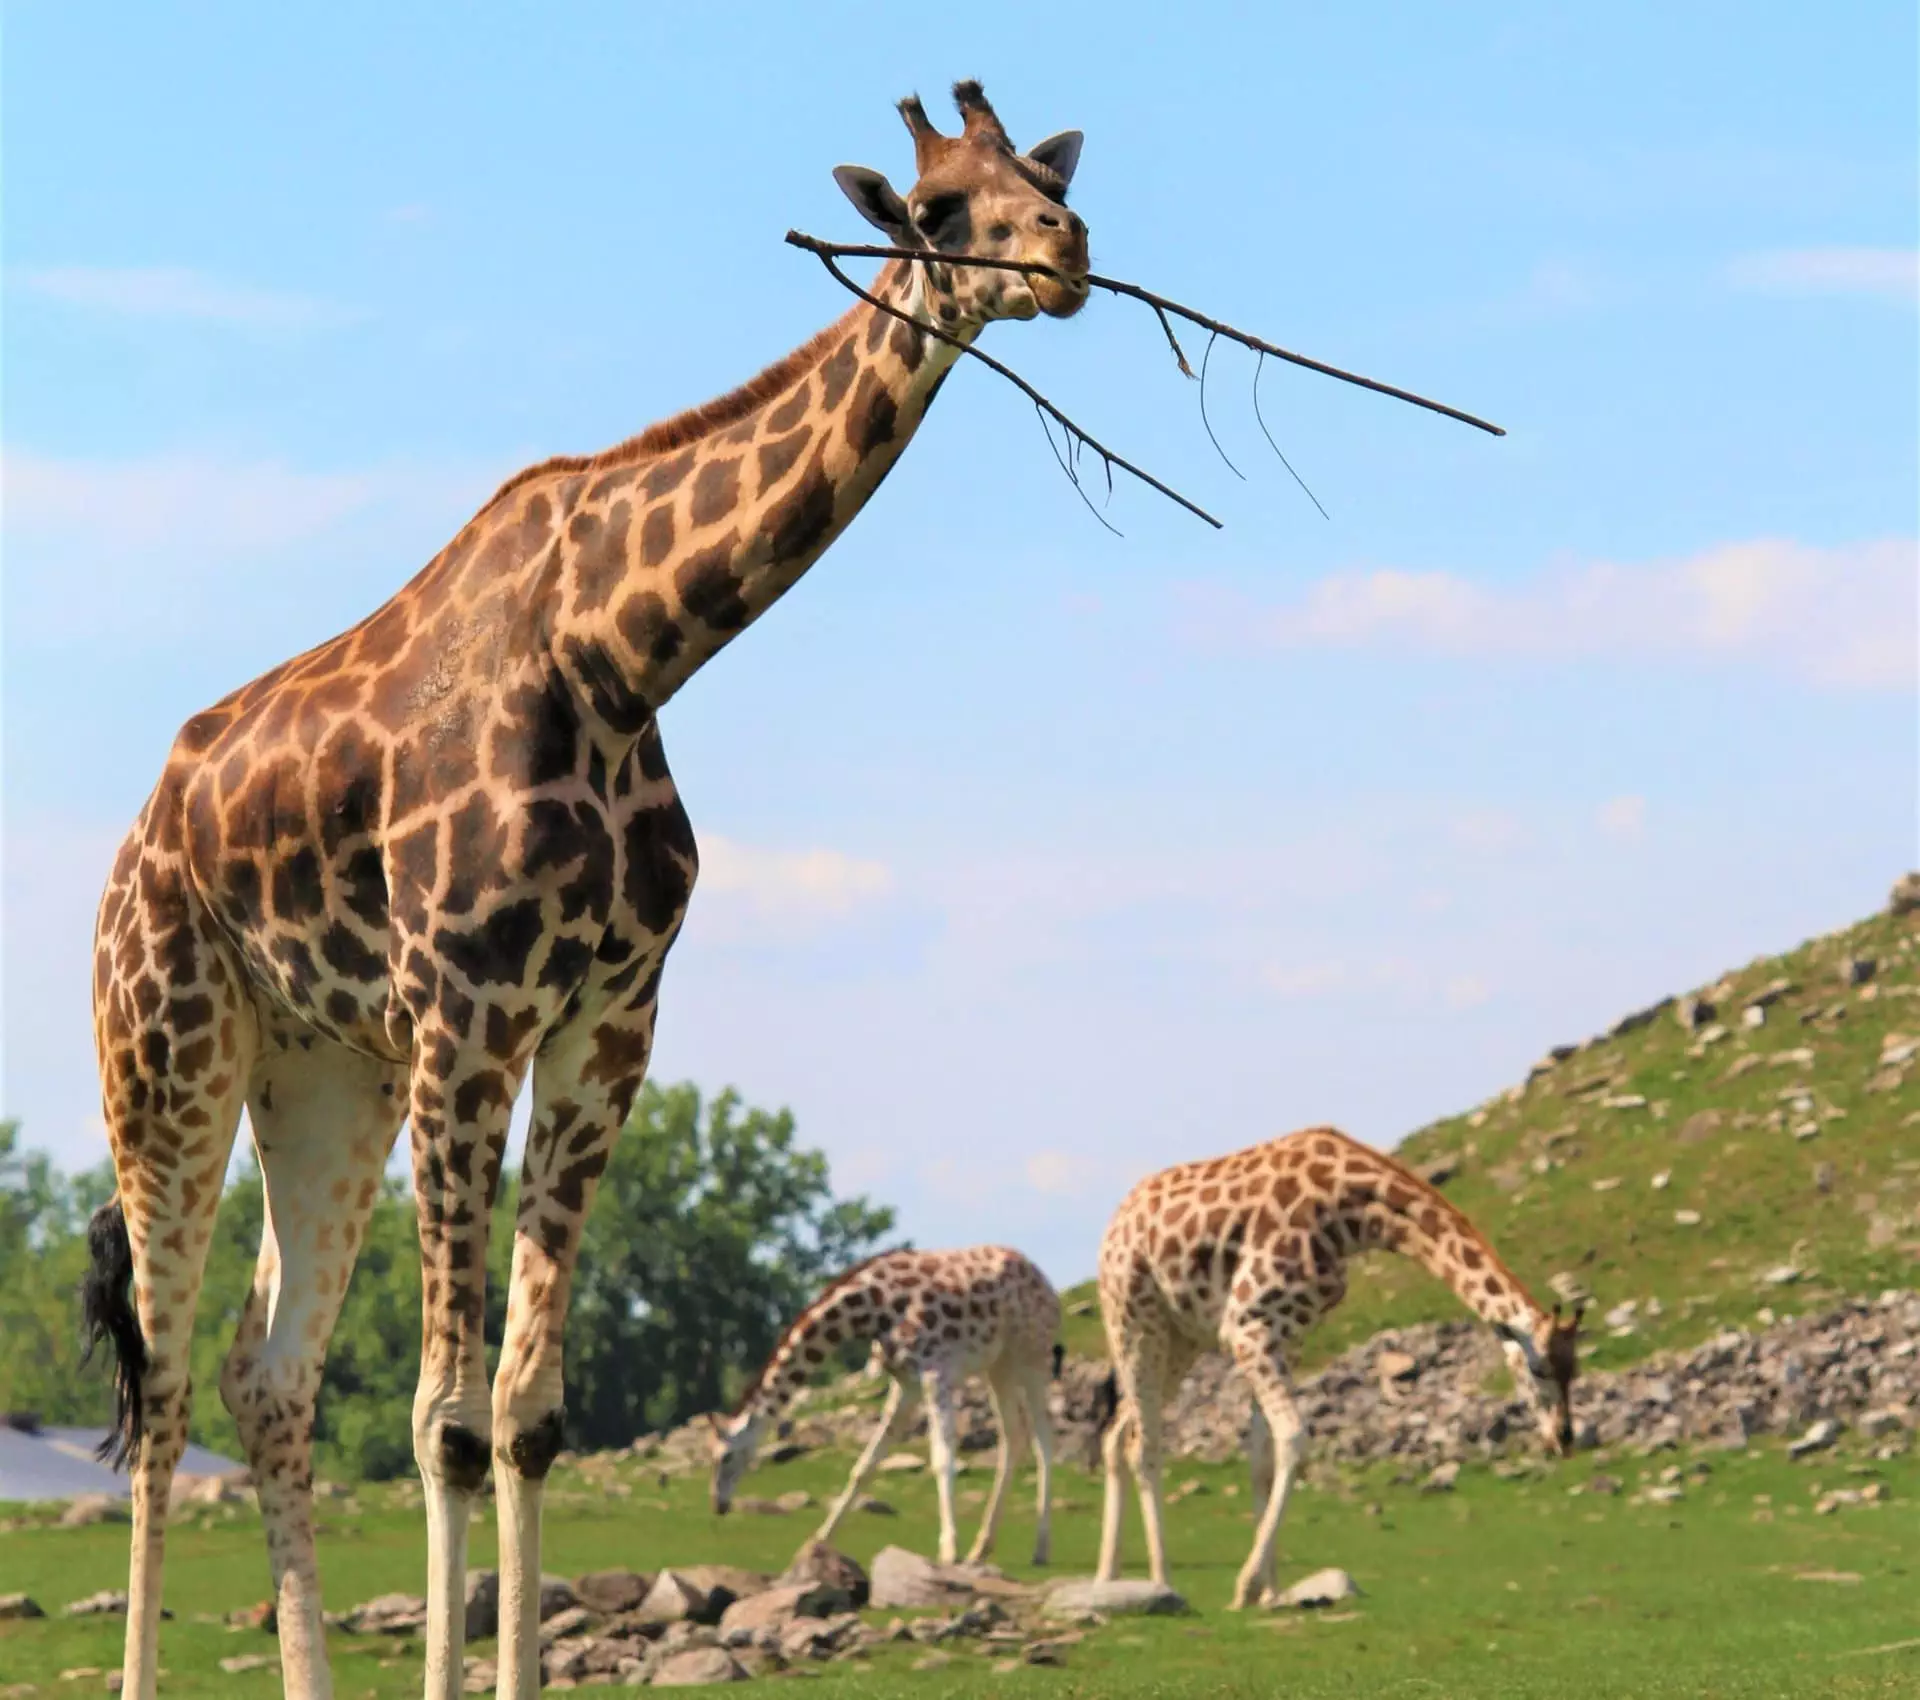 Giraffe with stick and 2 in the background